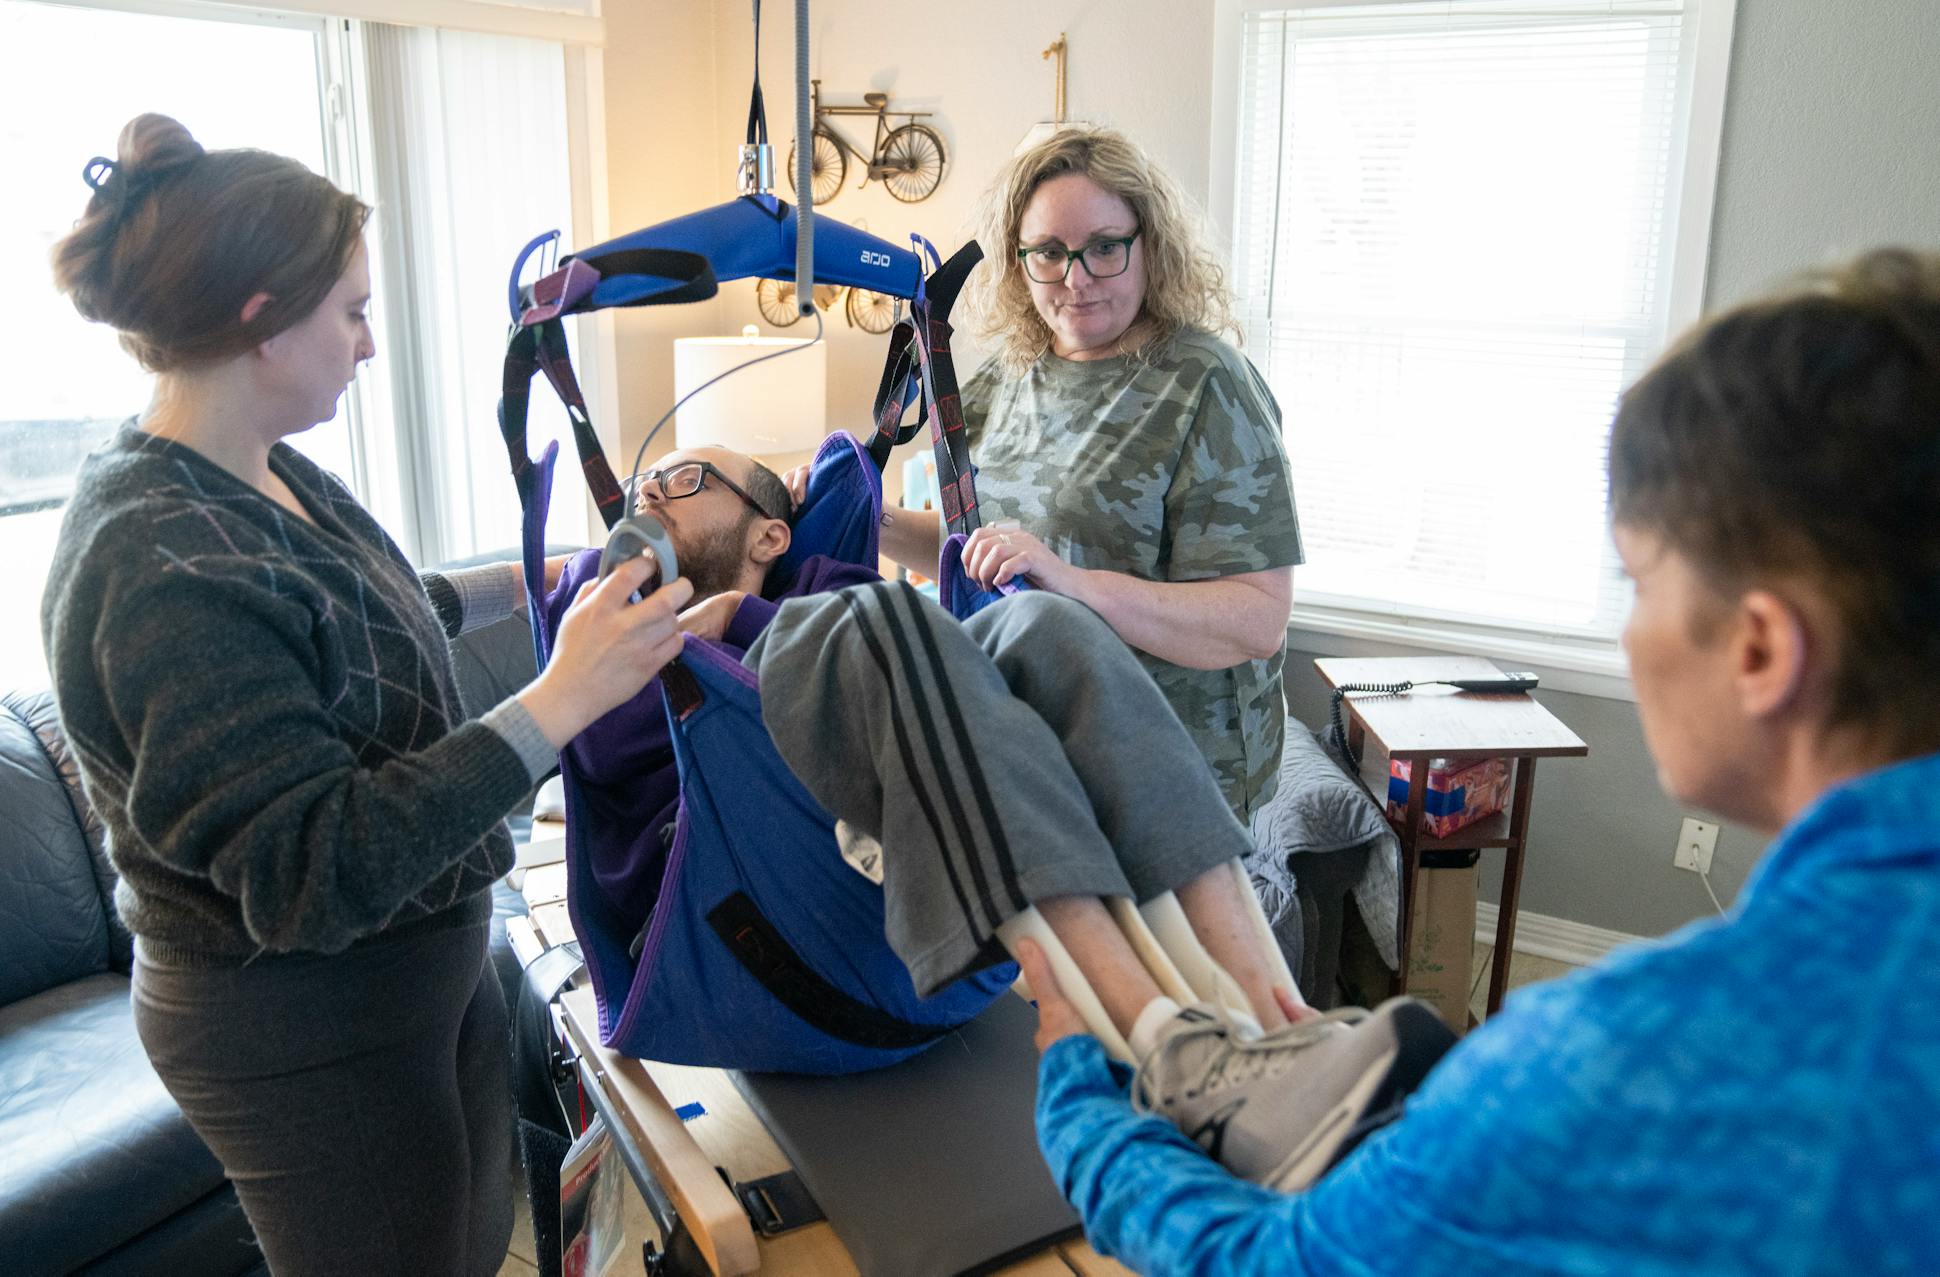 Ashley Topp, Kathy Ware and Lori McCoy guide Kylen's motorized lift during a physical therapy session.